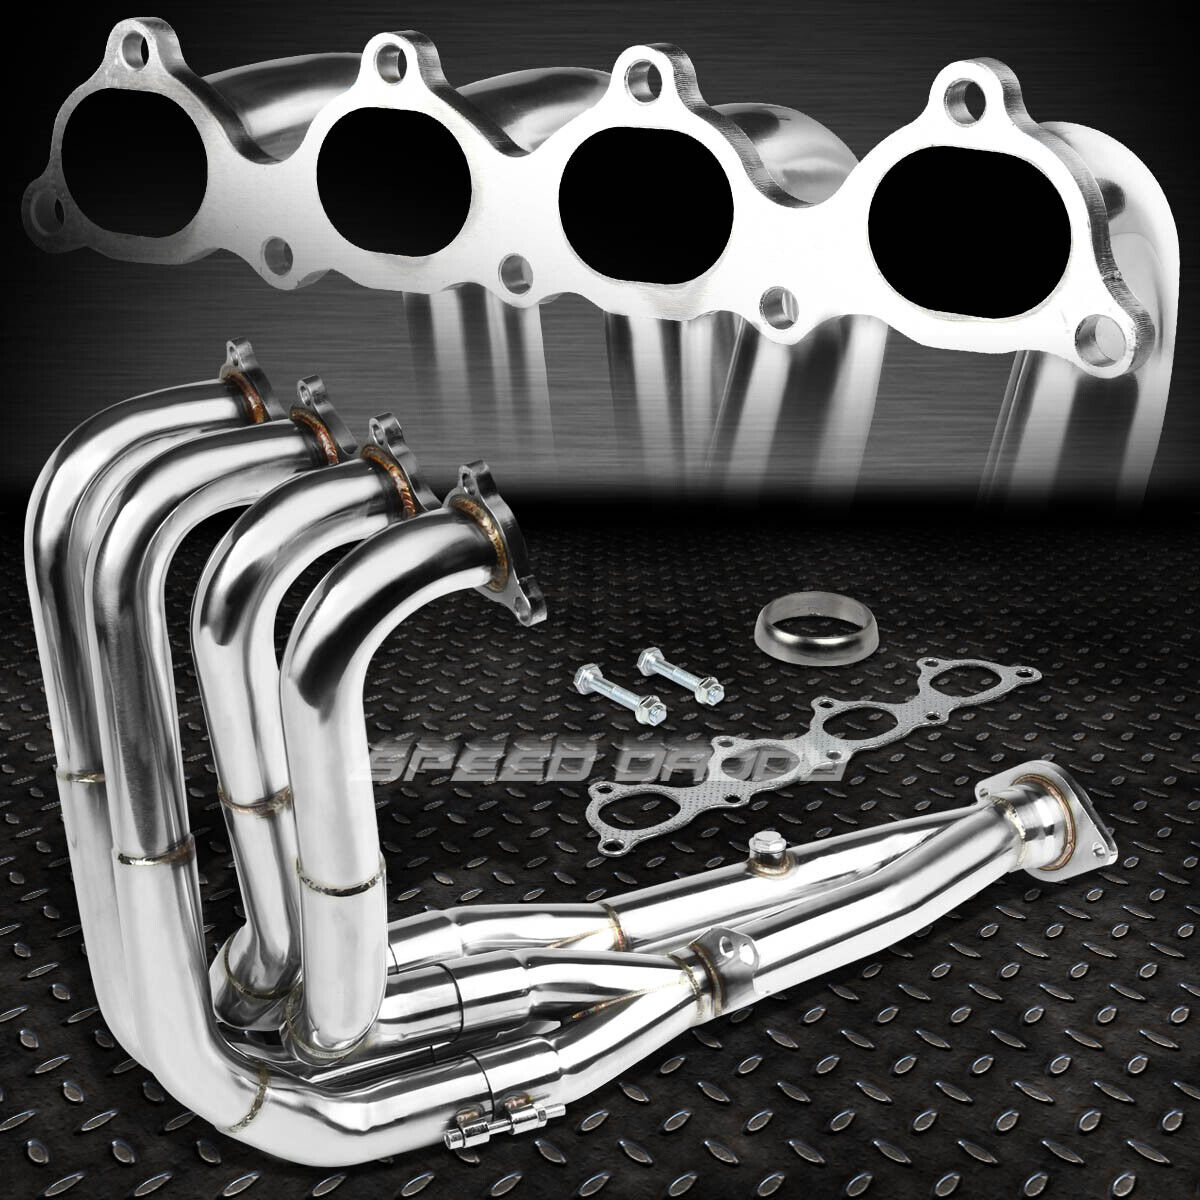 FOR 94-01 ACURA INTEGRA GSR/TYPE-R CIVIC SI B-SERIES TRI-Y RACING EXHAUST HEADER